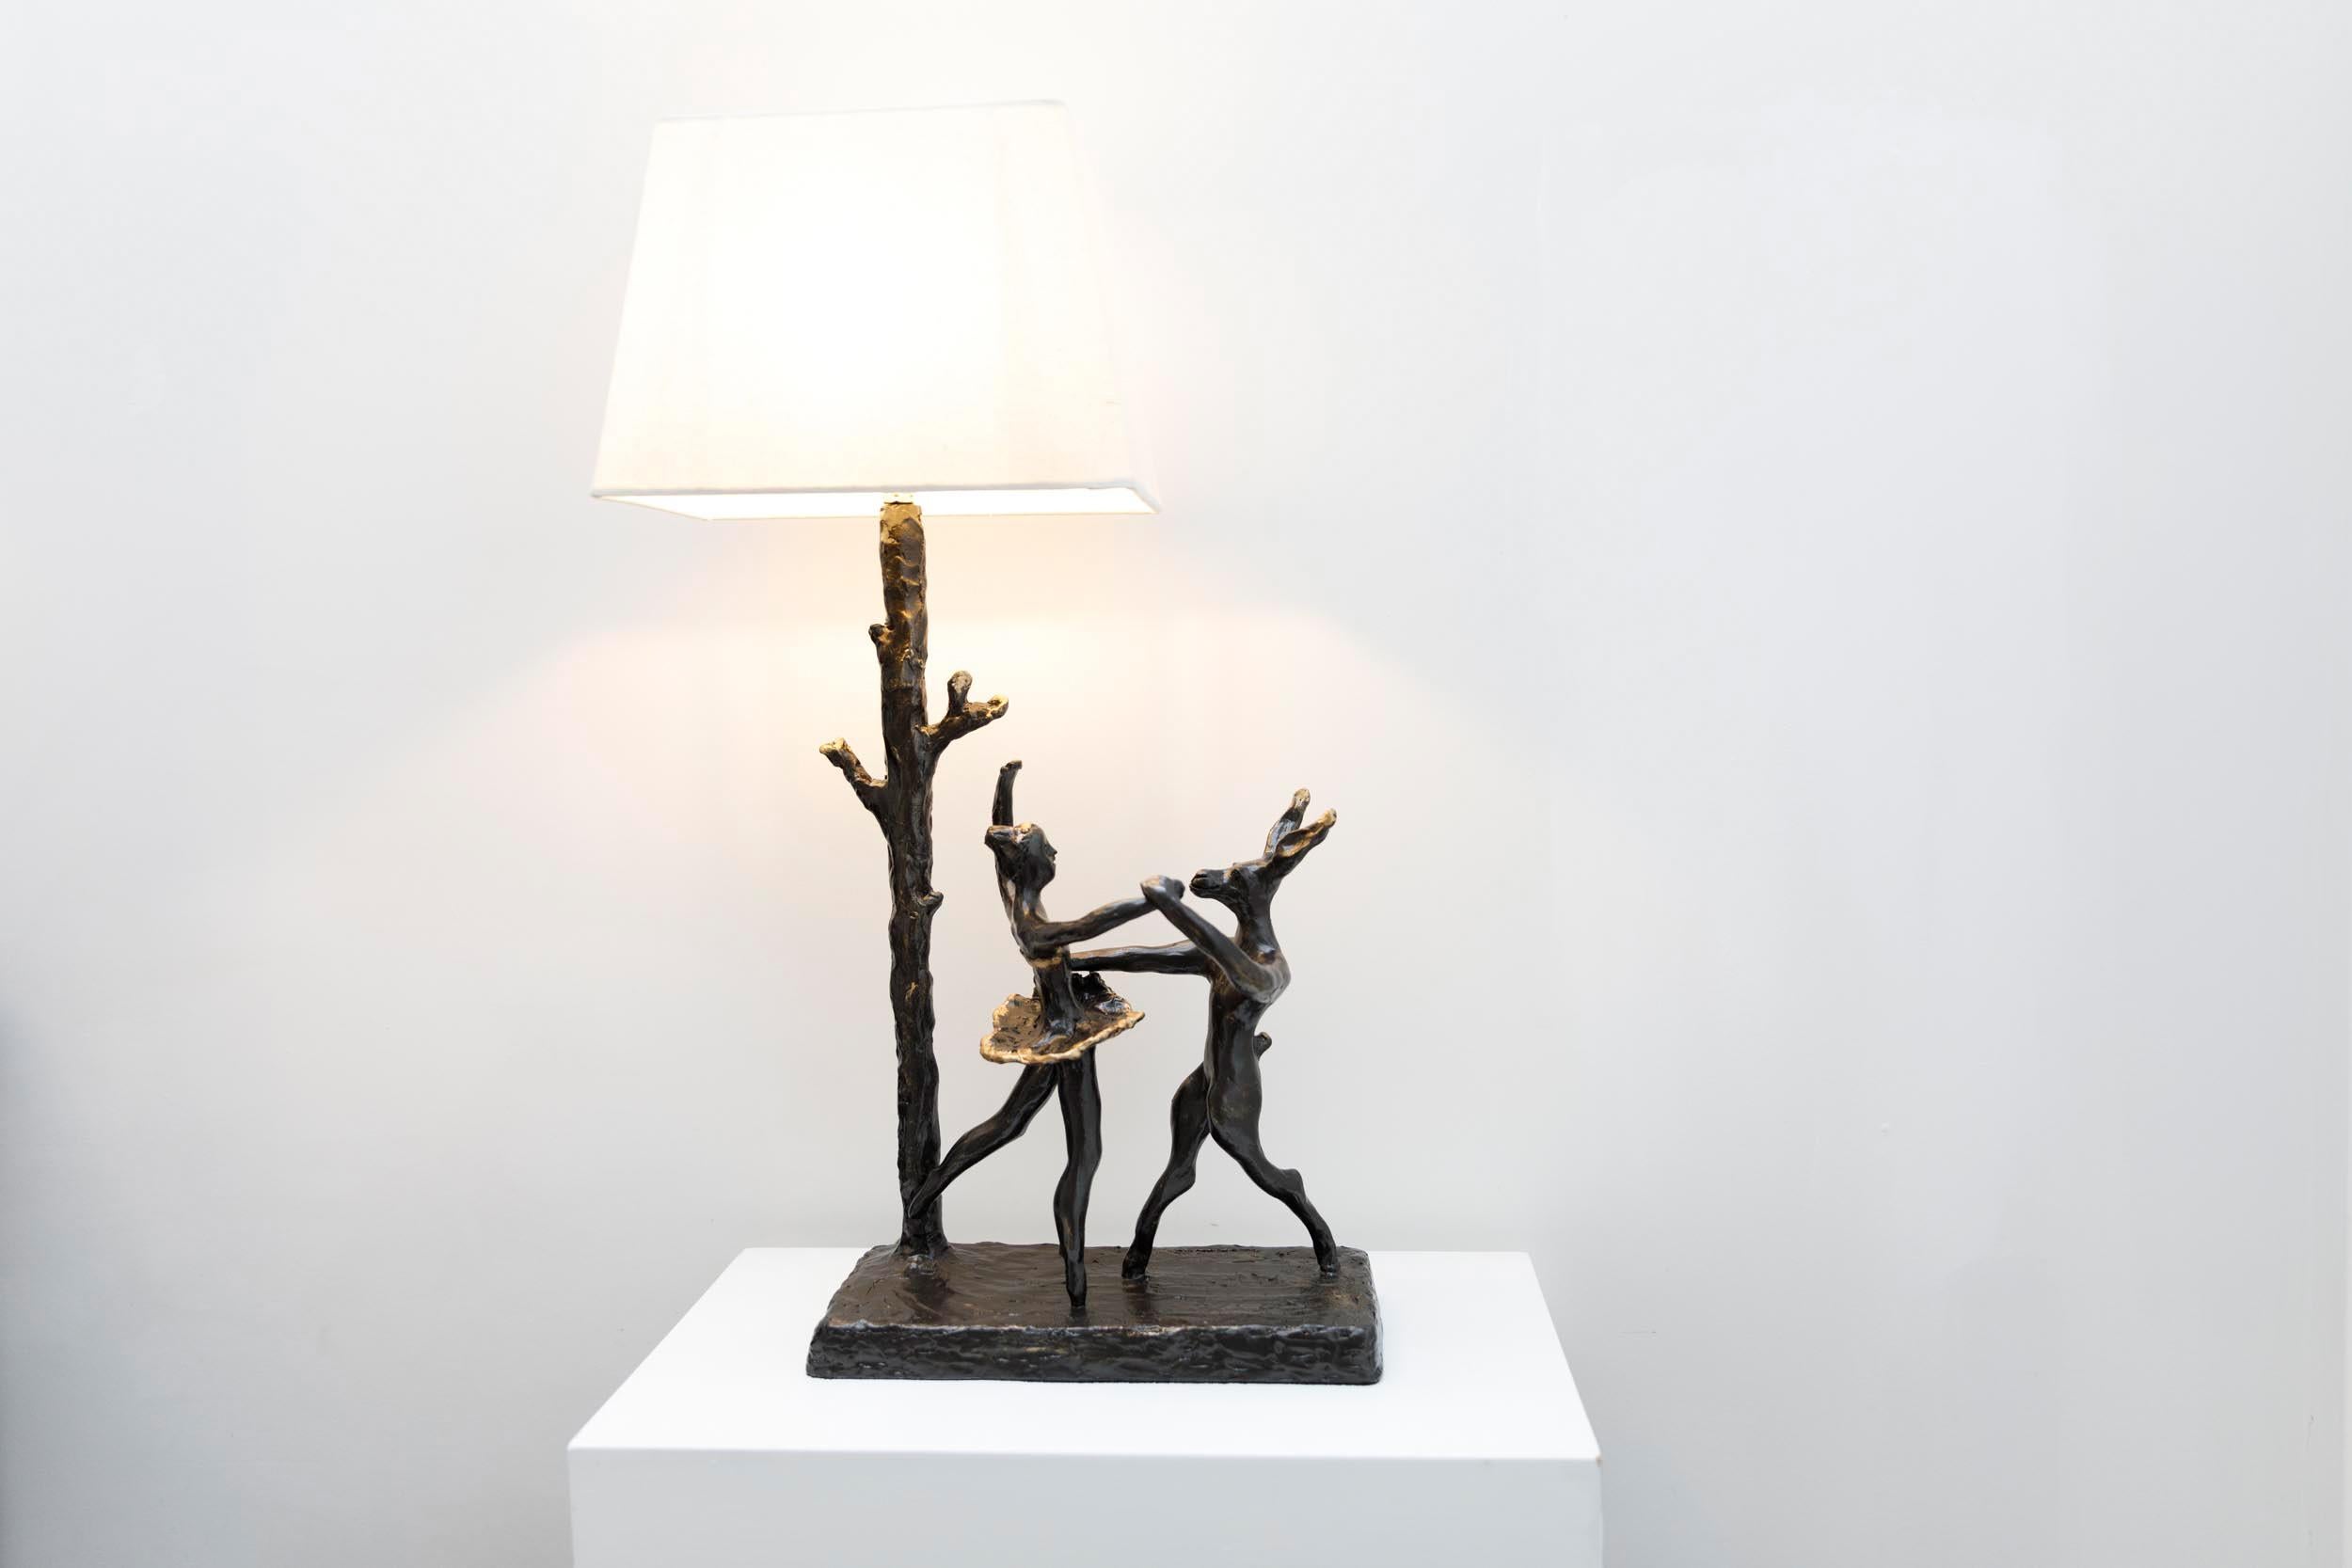 Hare & Ballerina sculptural table lamp, hand crafted, moulded and cast in  bronze.  A whimsical lamp of a hare dancing alongside a ballerina by the tree trunk. A charming piece of functional art work creating luminous corner and warming anyone's